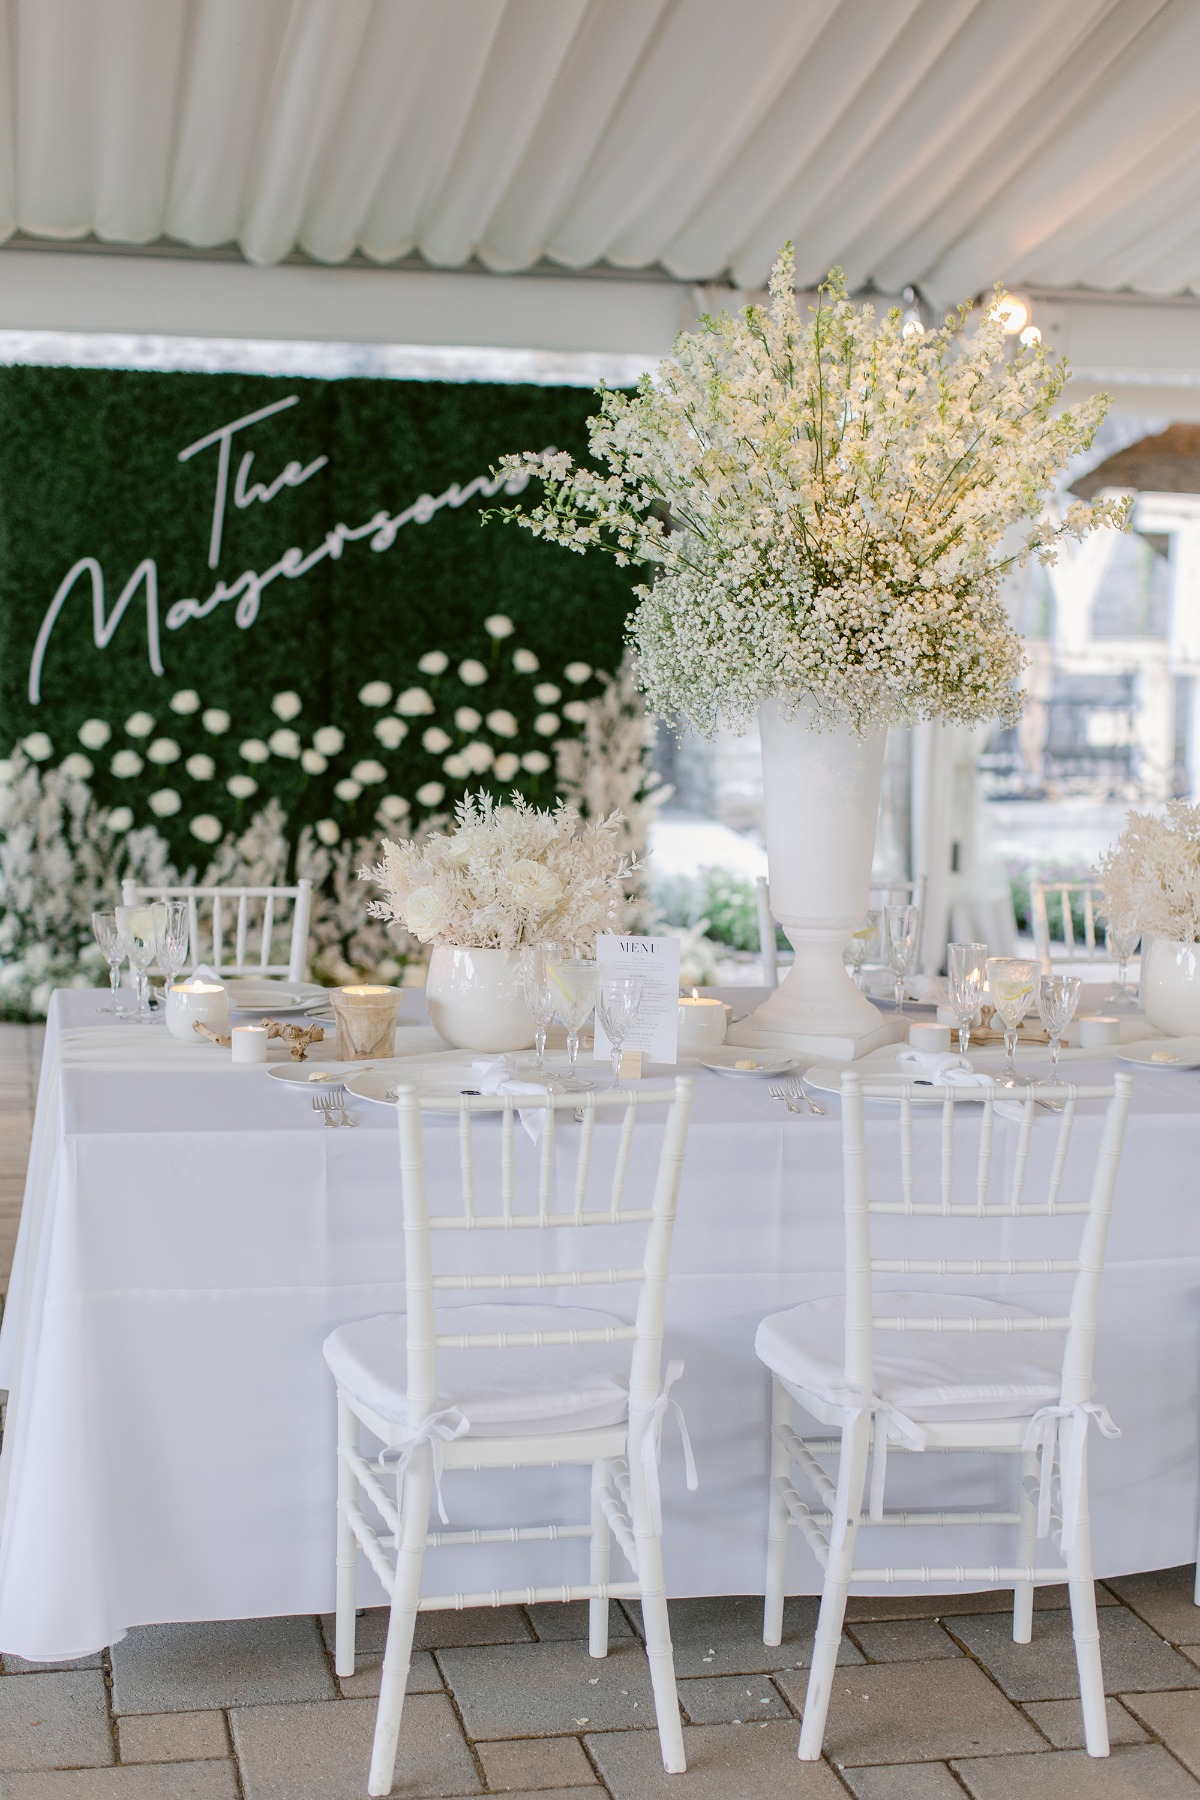 Reception table with centerpieces and grass wall in background